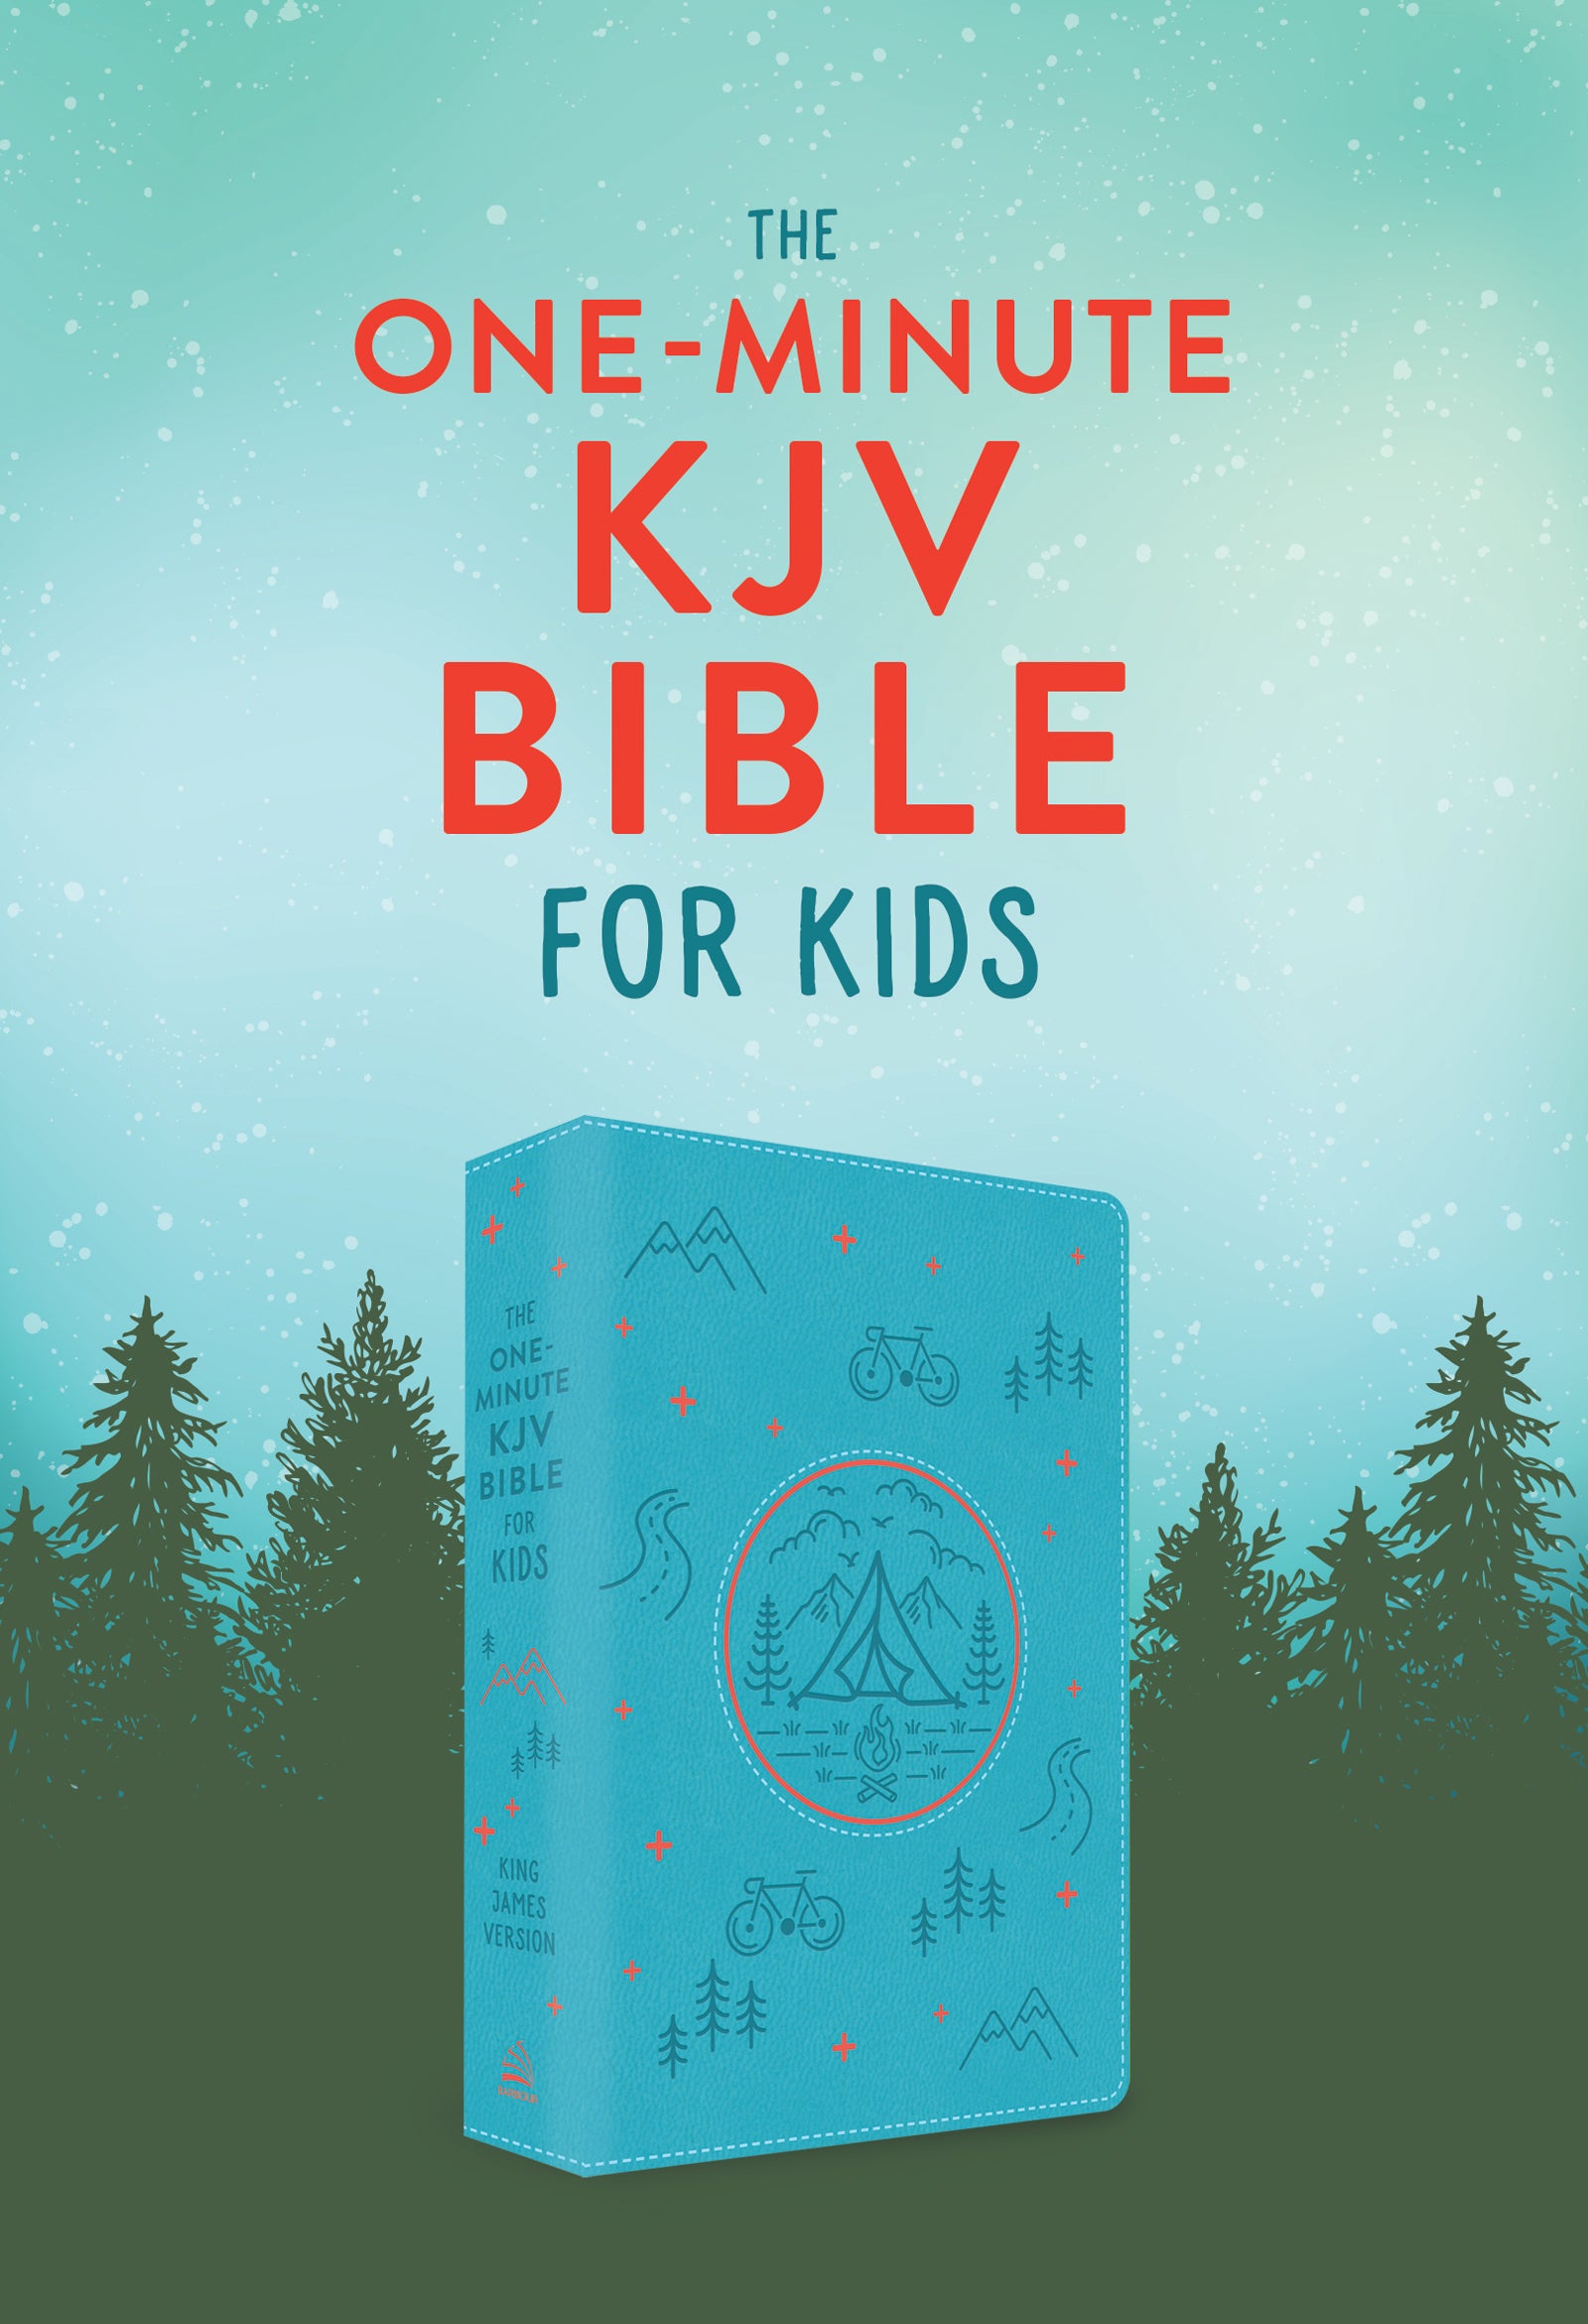 The One-Minute KJV Bible for Kids [Adventure Blue] - The Christian Gift Company